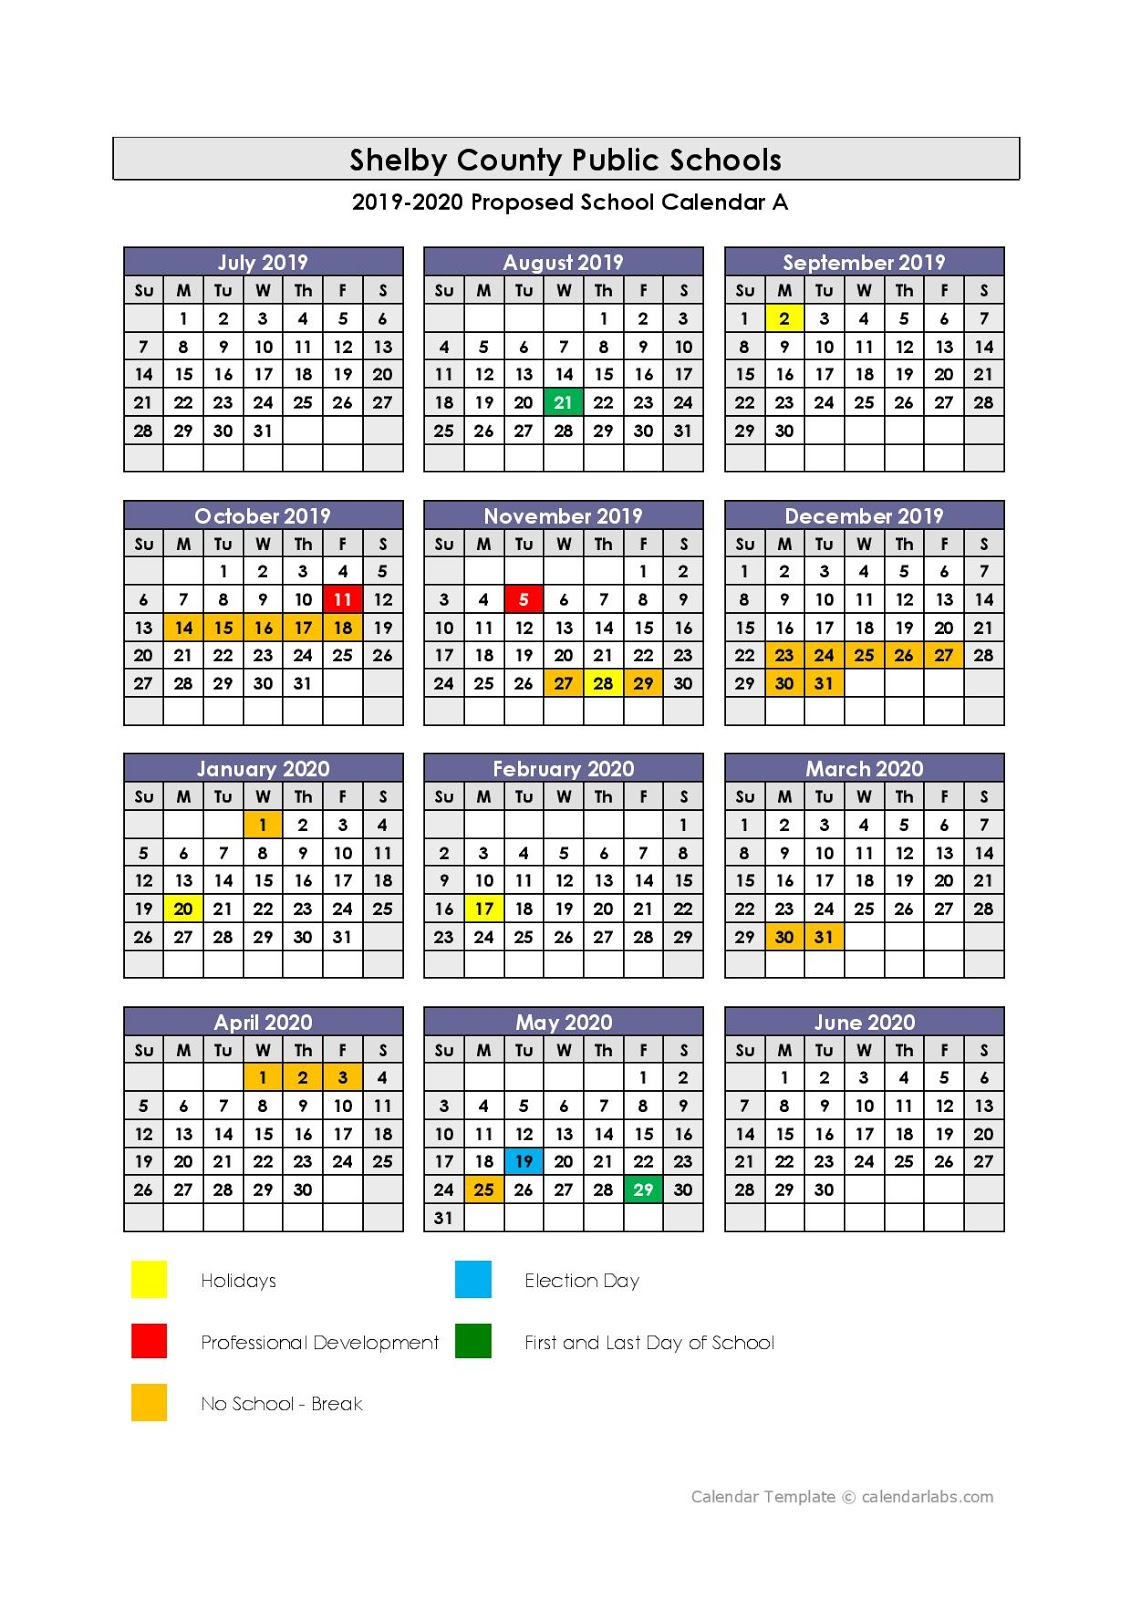 Shelby County Public Schools Calendar 2020 And 2021